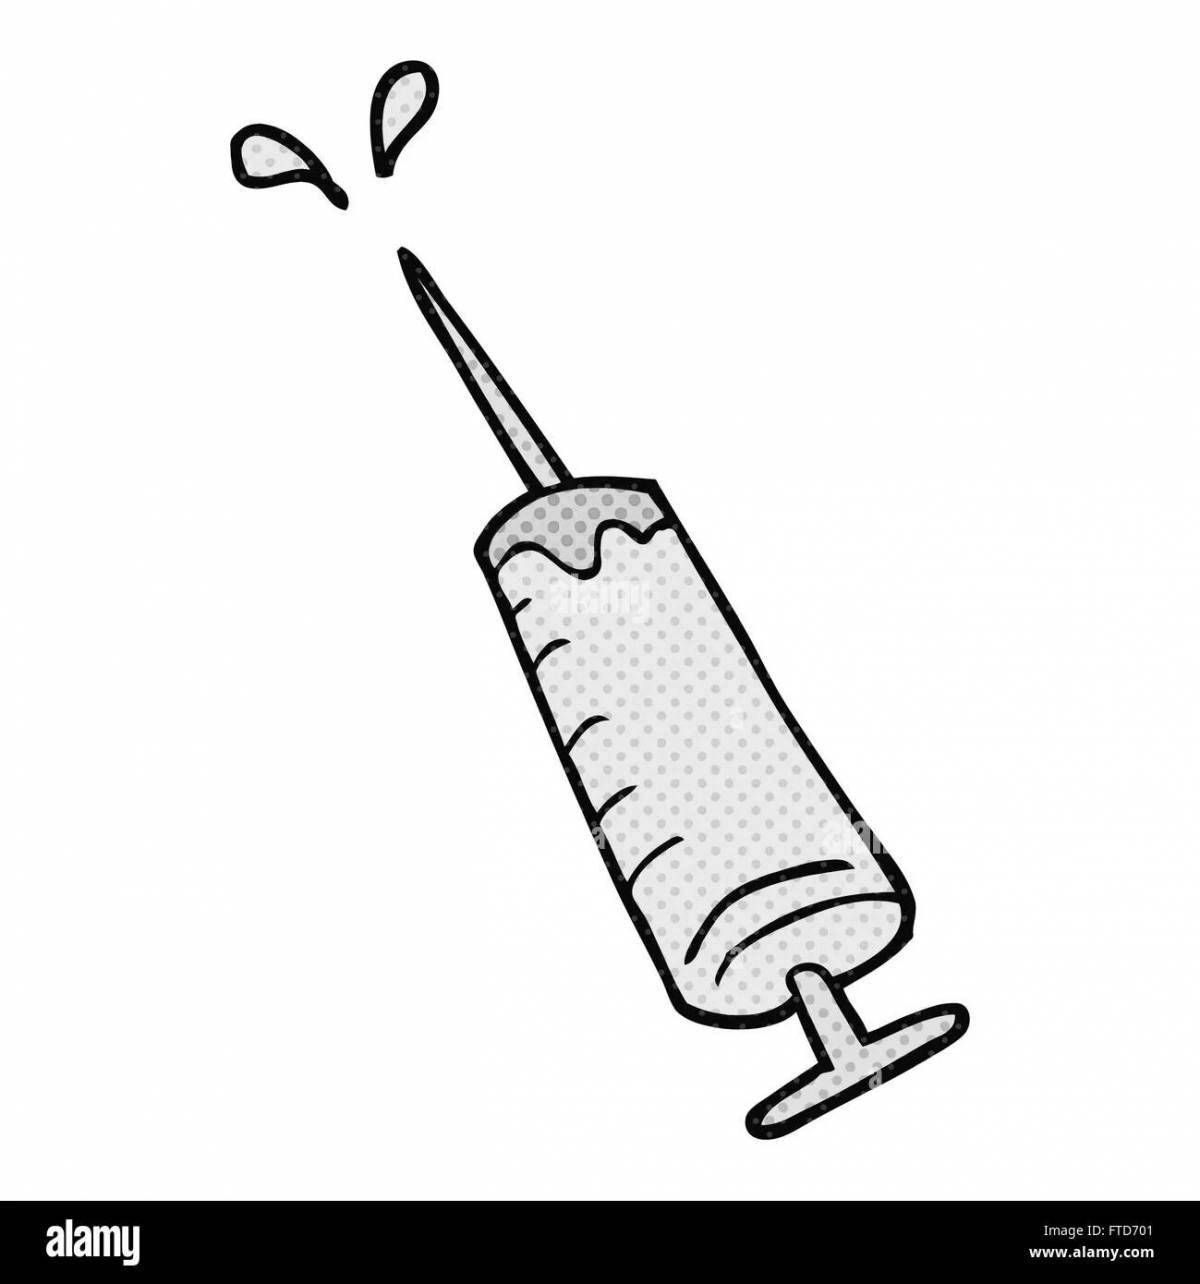 Coloring page fancy syringe with needle